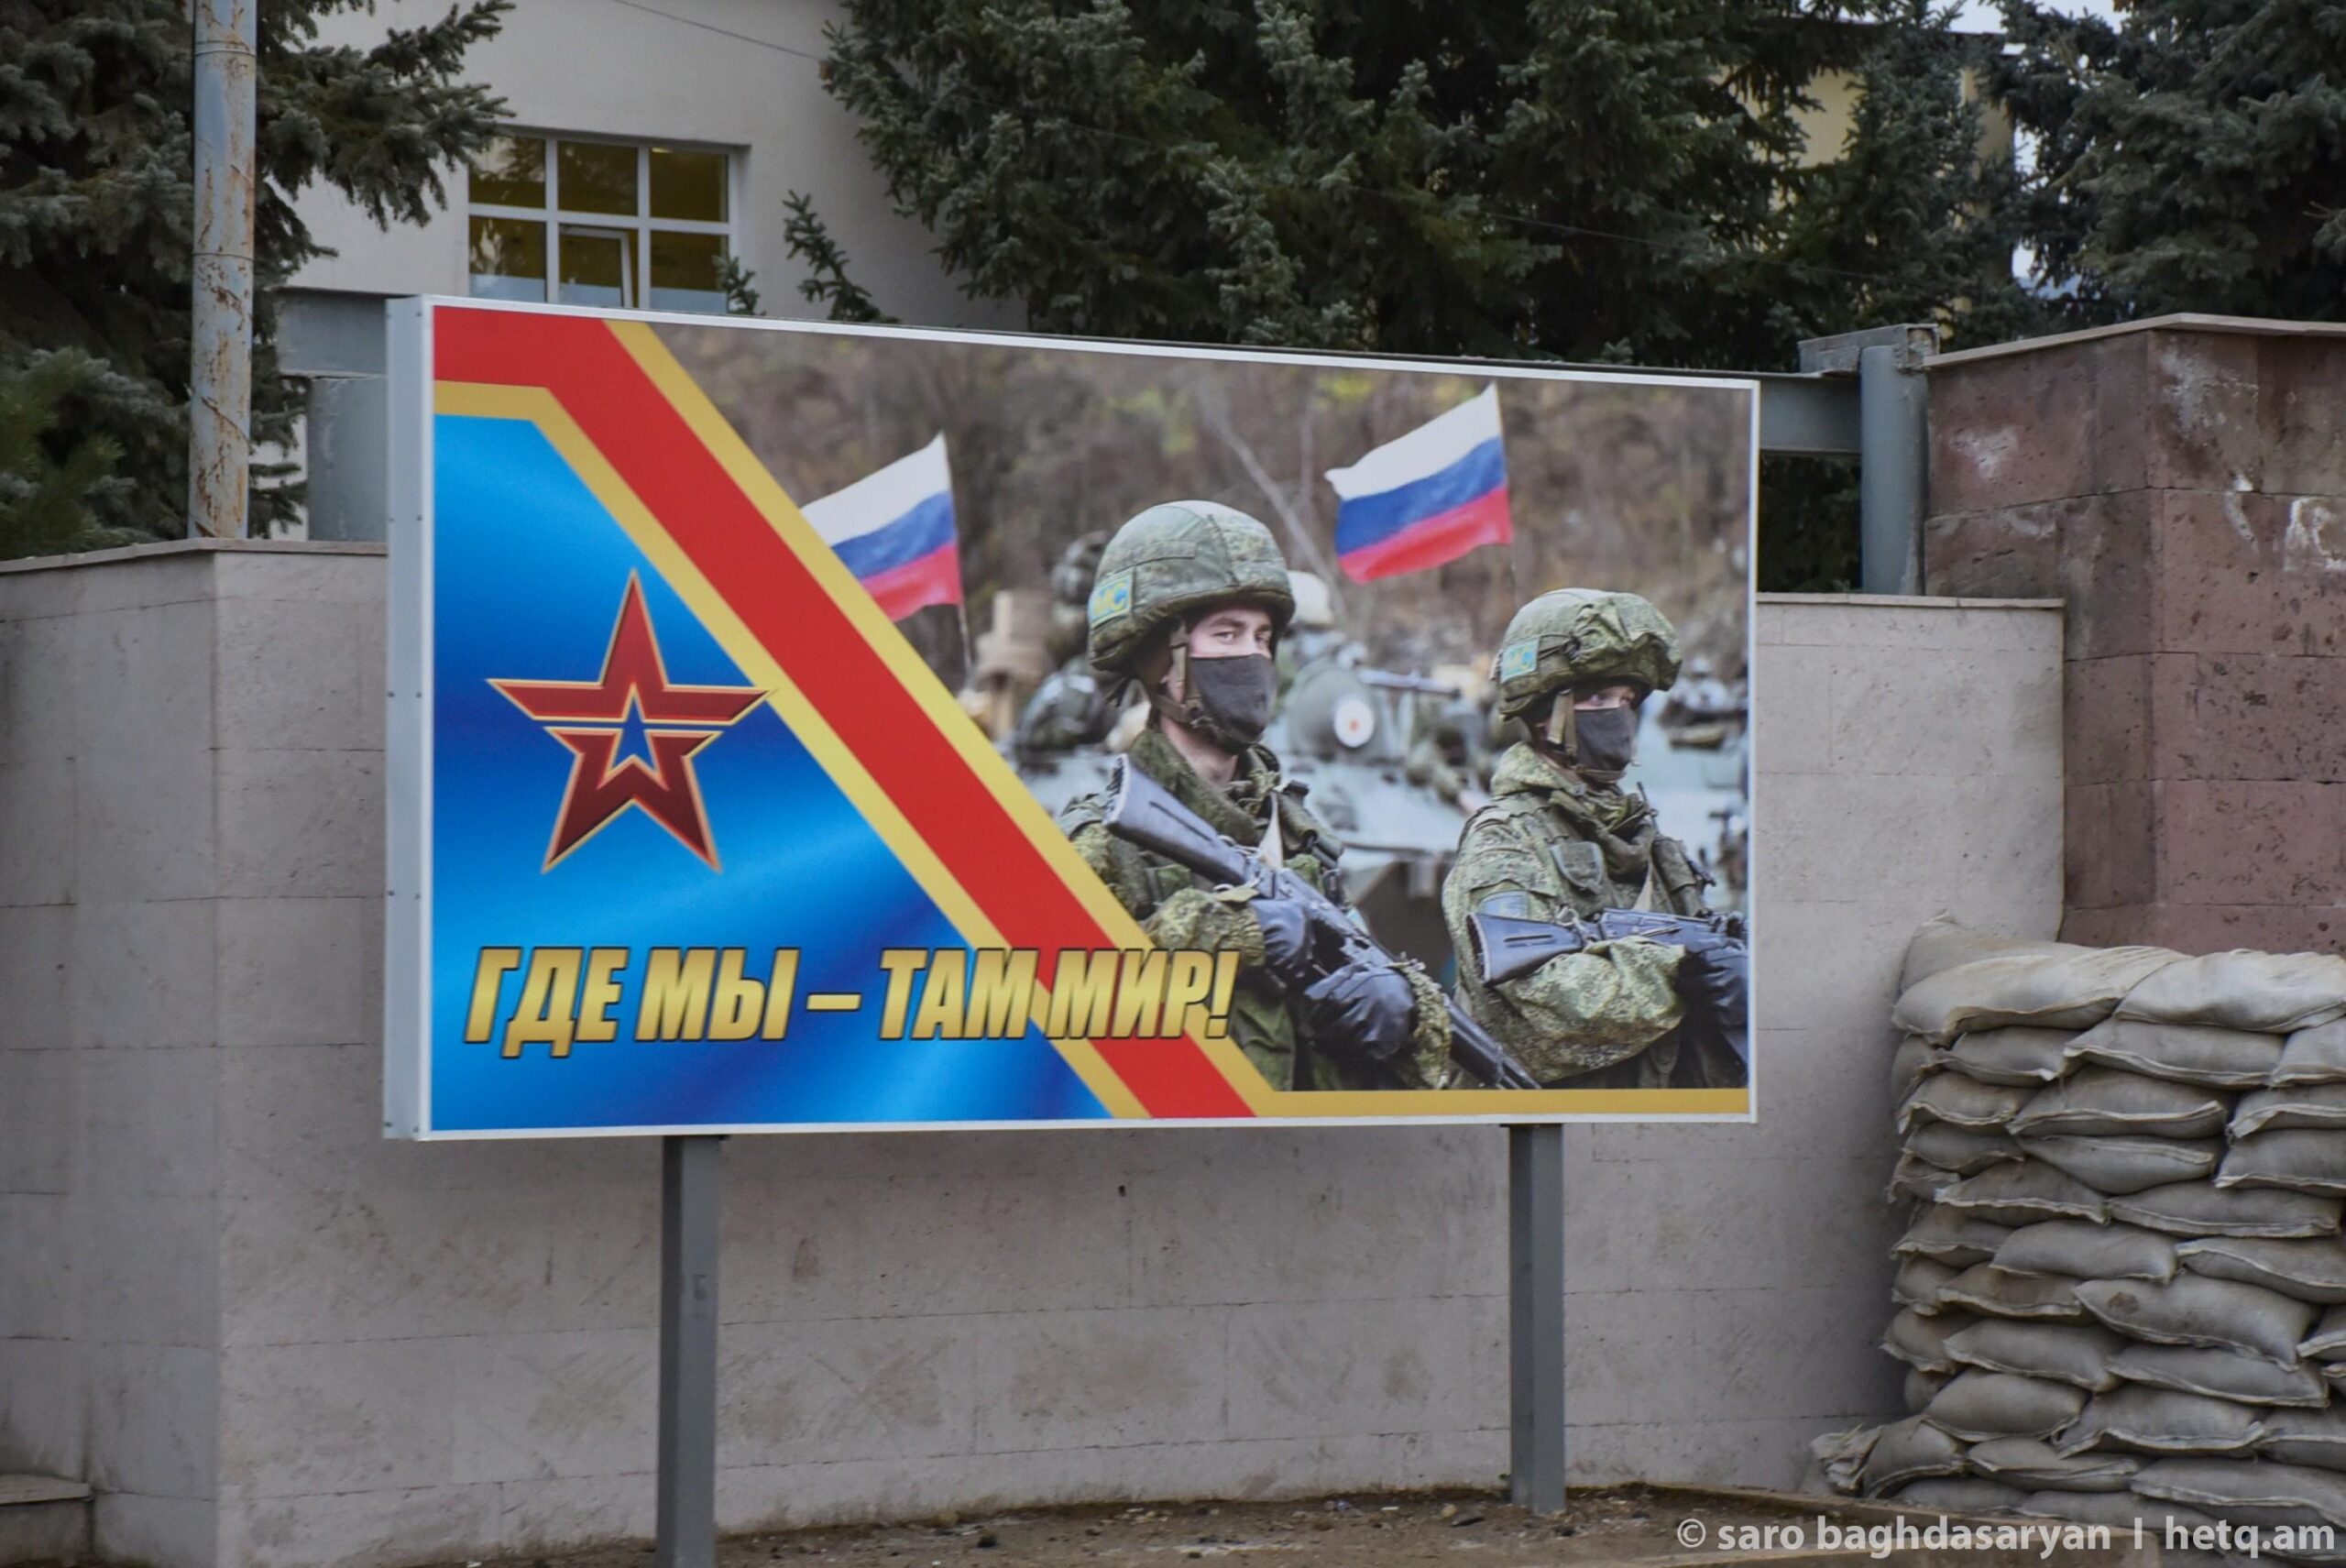 US Troops' Arrival in Armenia for Training Riles Russia